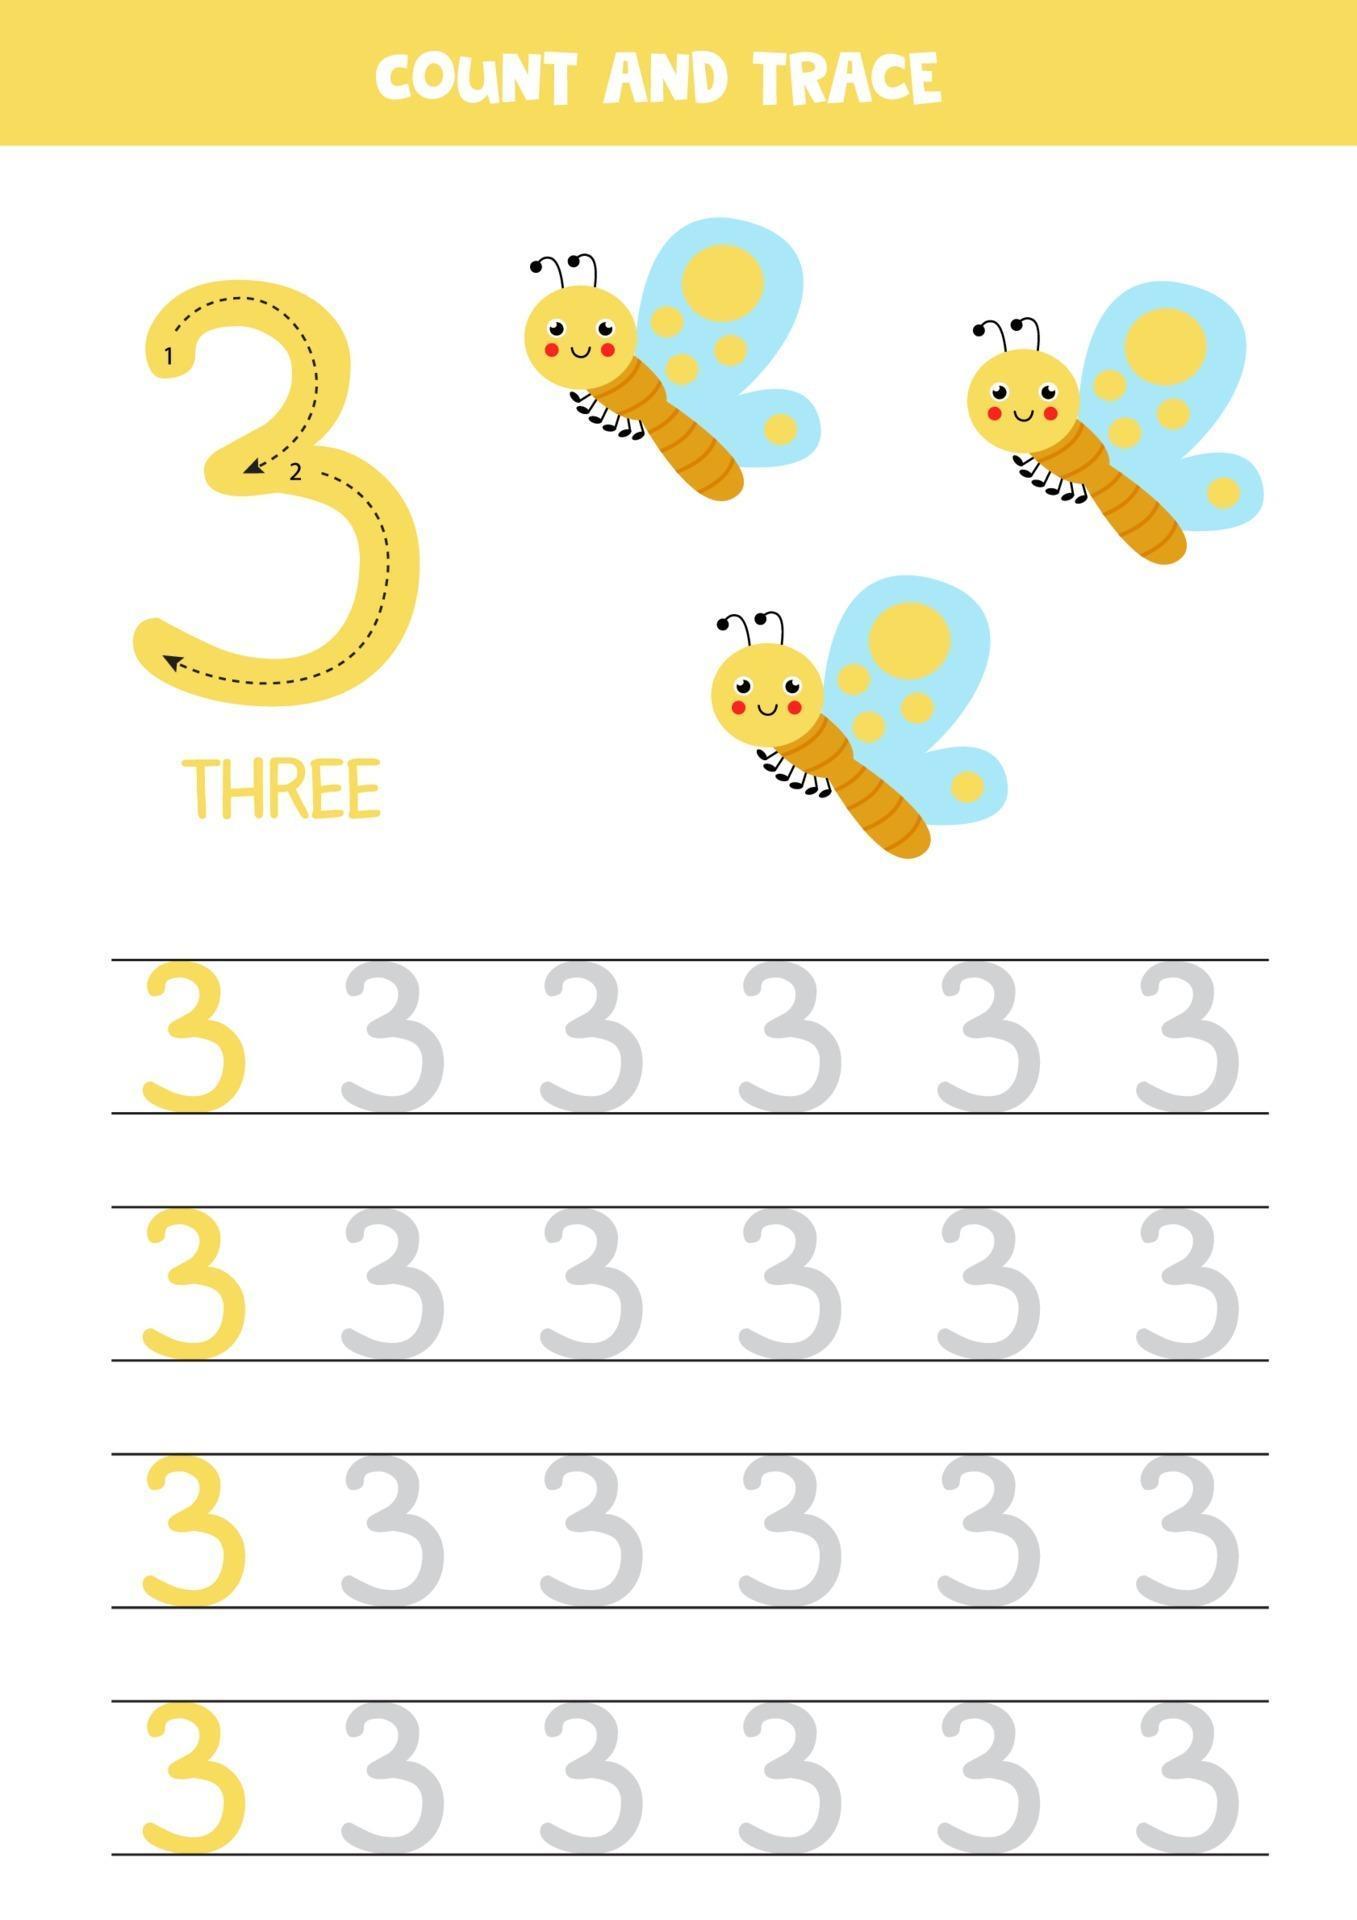 tracing-numbers-worksheet-with-cute-butterflies-trace-number-3-2287531-vector-art-at-vecteezy